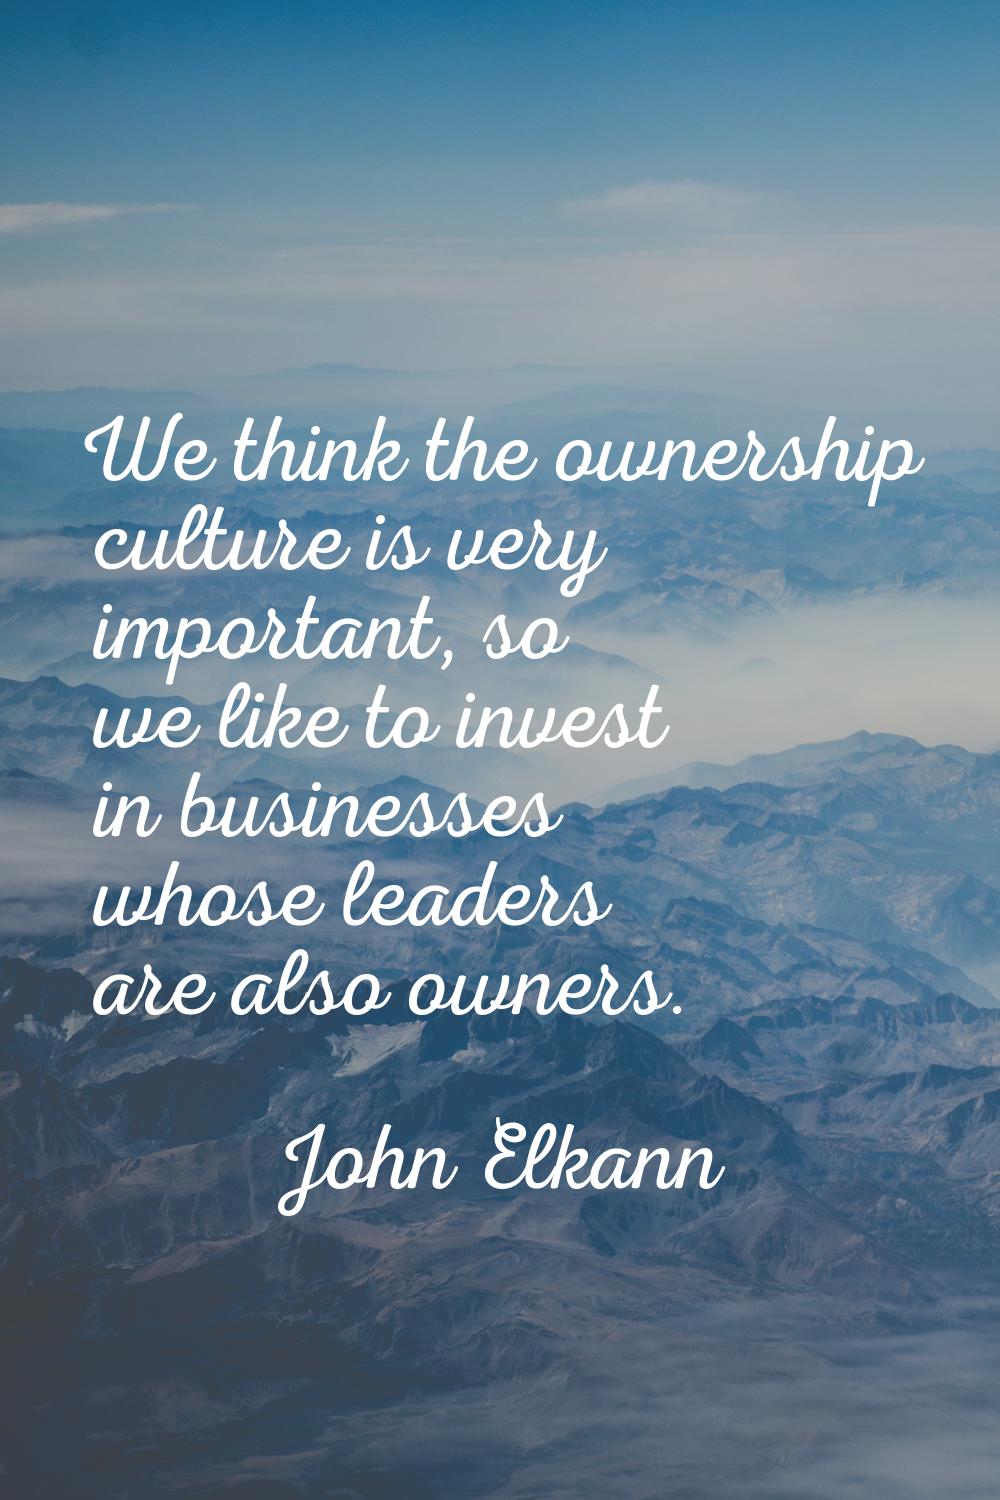 We think the ownership culture is very important, so we like to invest in businesses whose leaders 